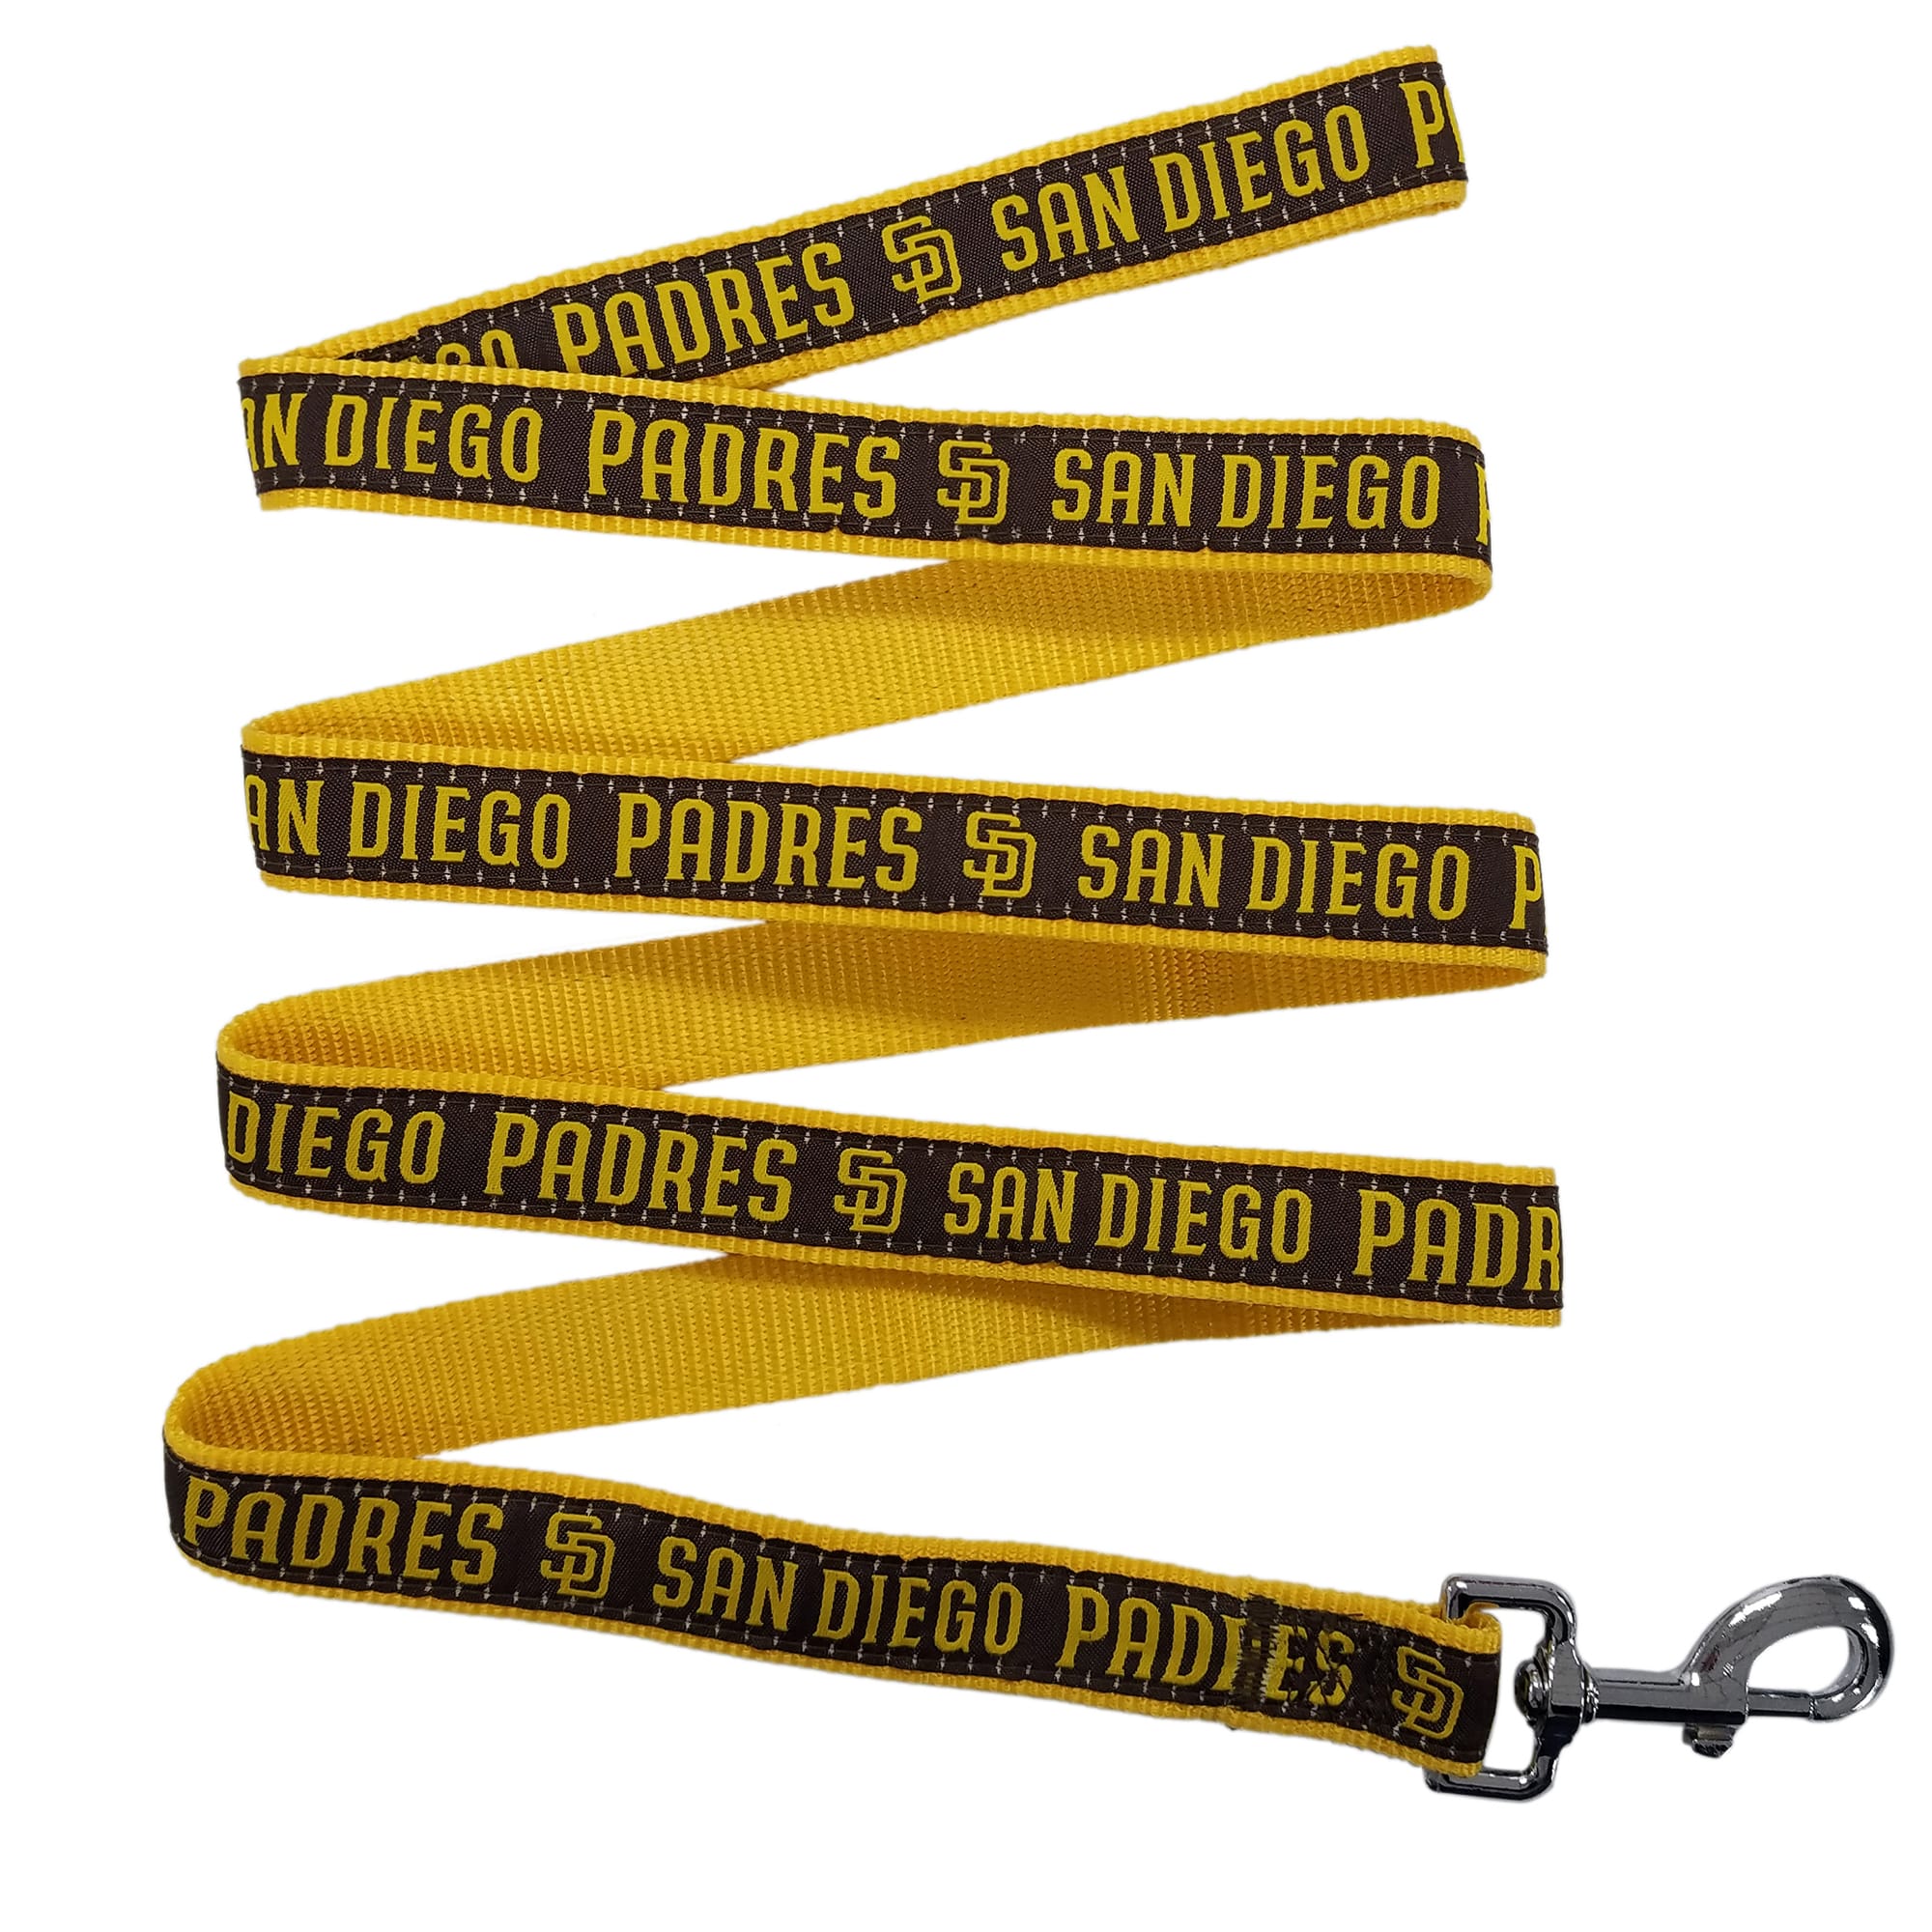 San Diego Padres Dog Jerseys, Padres Pet Carriers, Harness